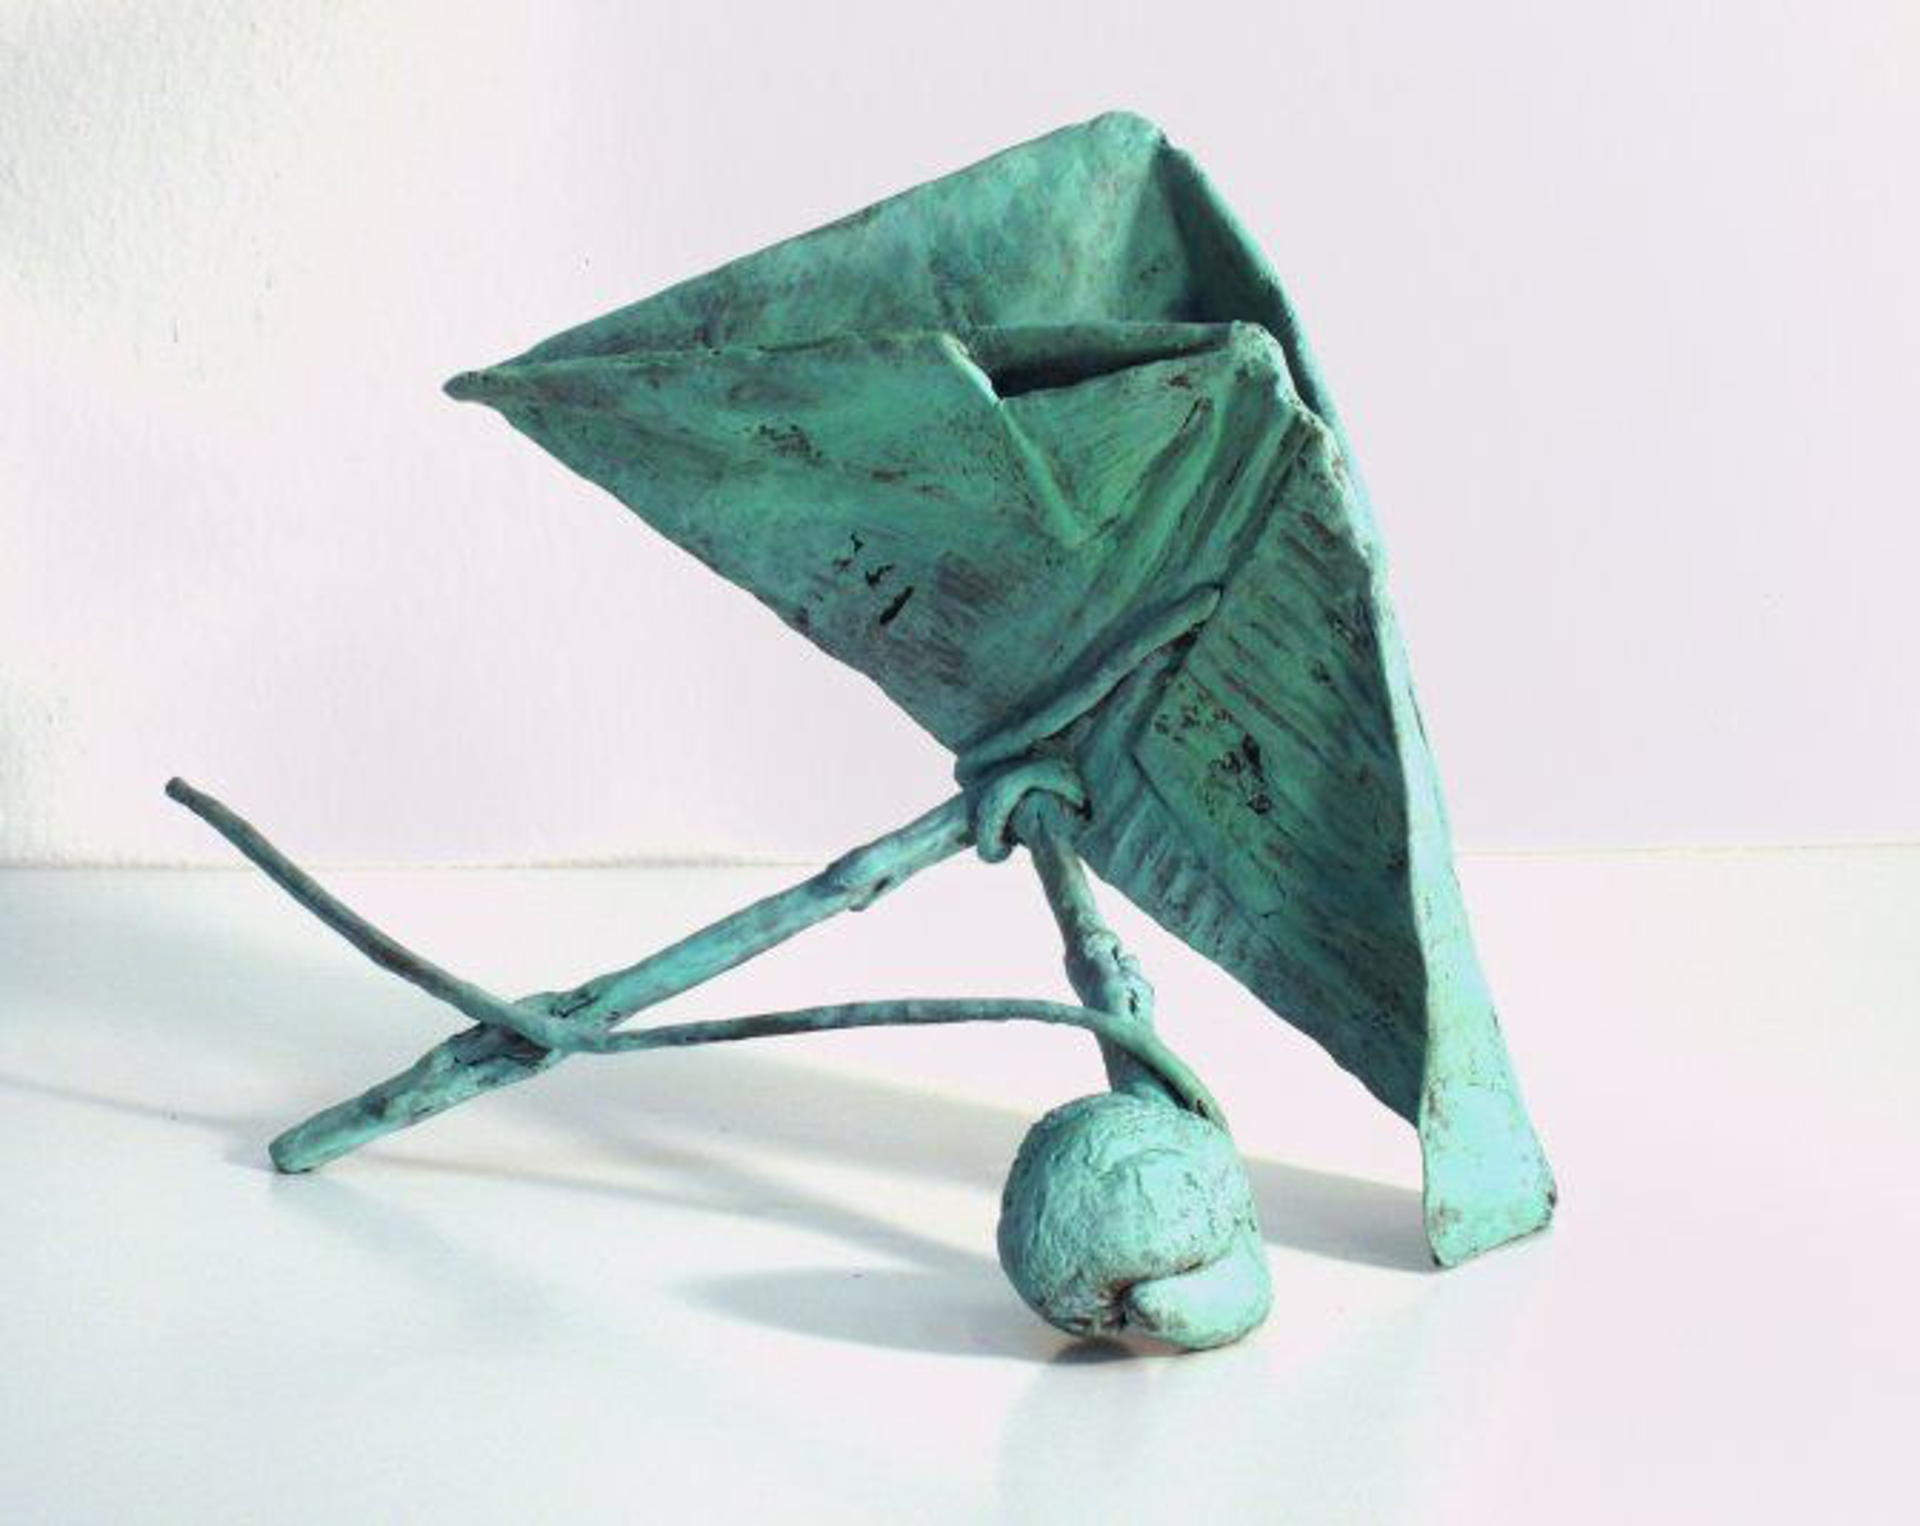 Anchored by Richard Stout - Sculptures